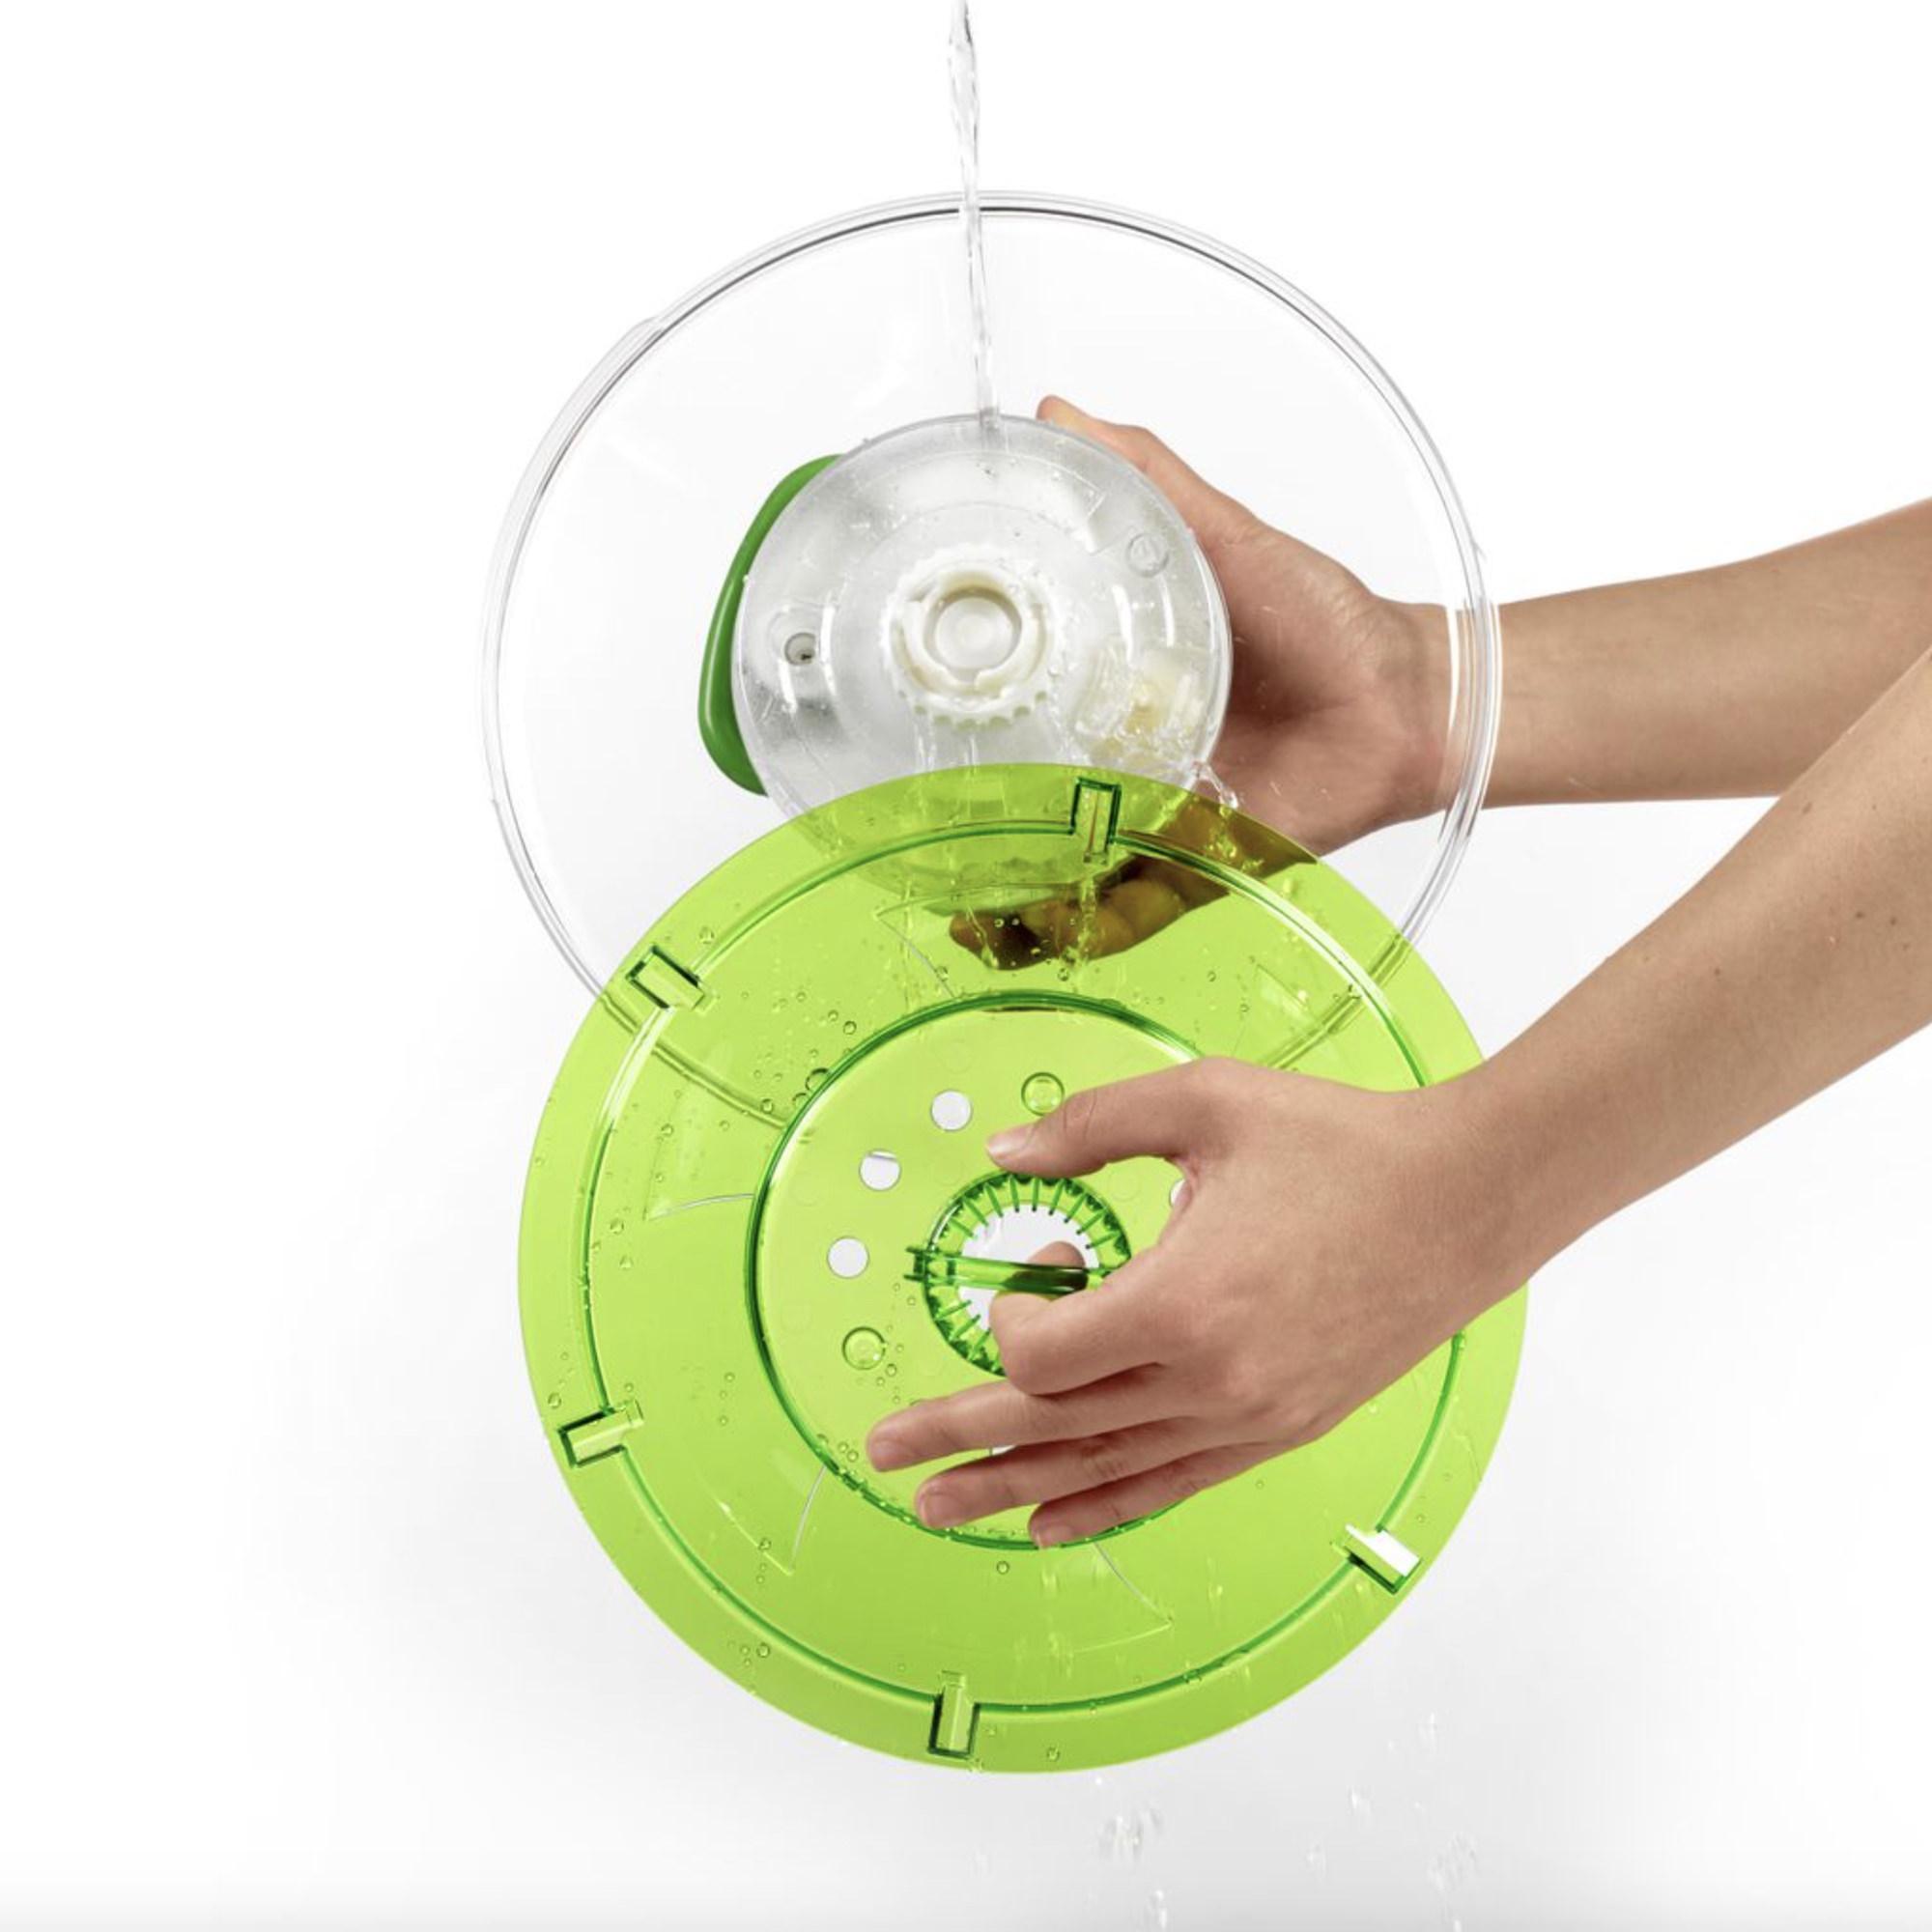 Zyliss Easy Spin 2 Salad Spinner Small Green Image 4